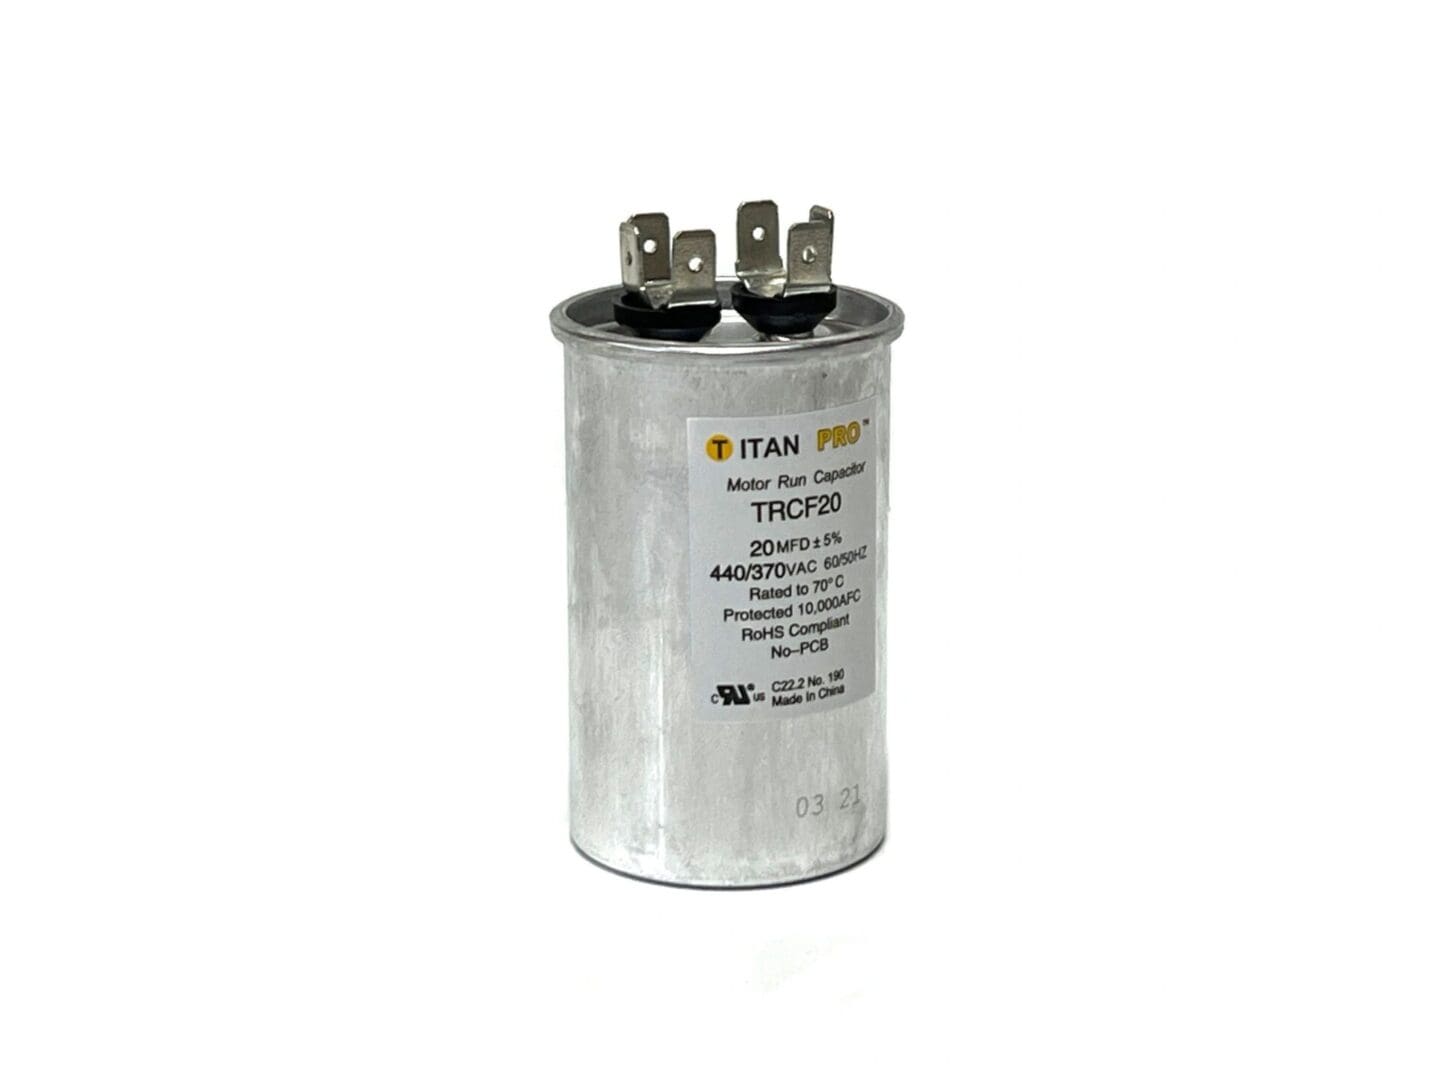 A capacitor is shown with three wires.